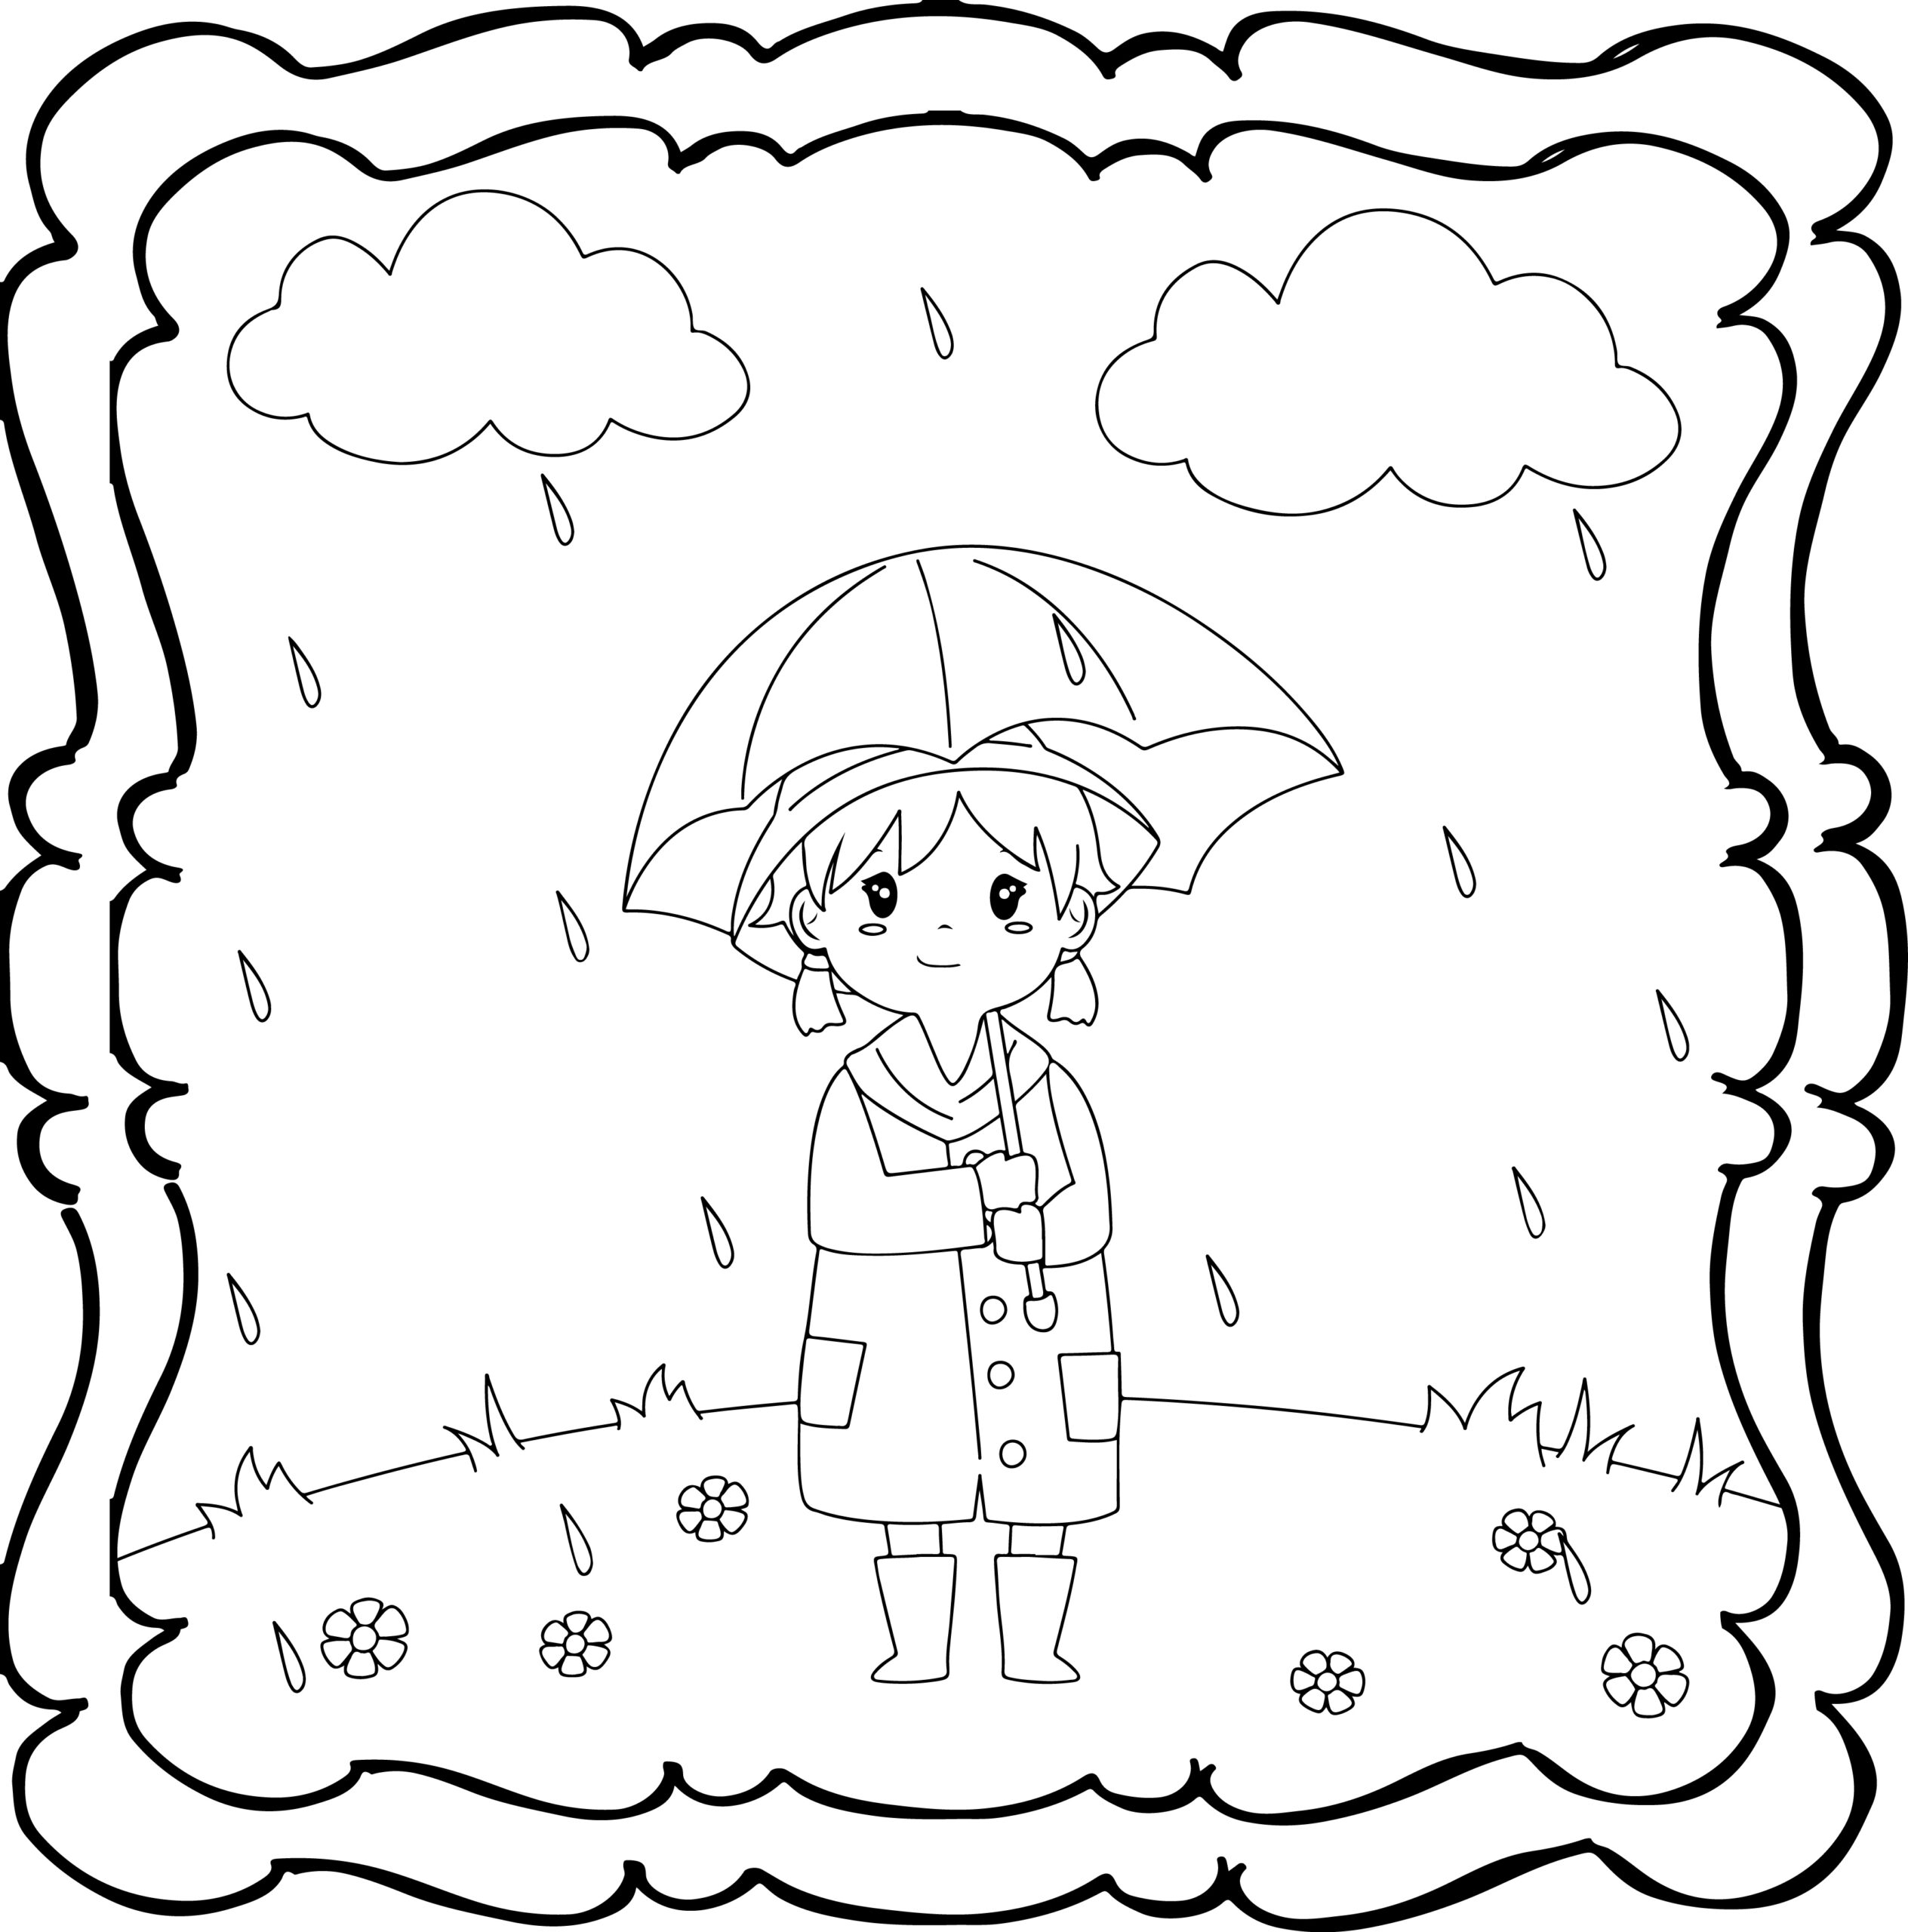 Rain coloring book easy and fun rain coloring book for kids made by teachers